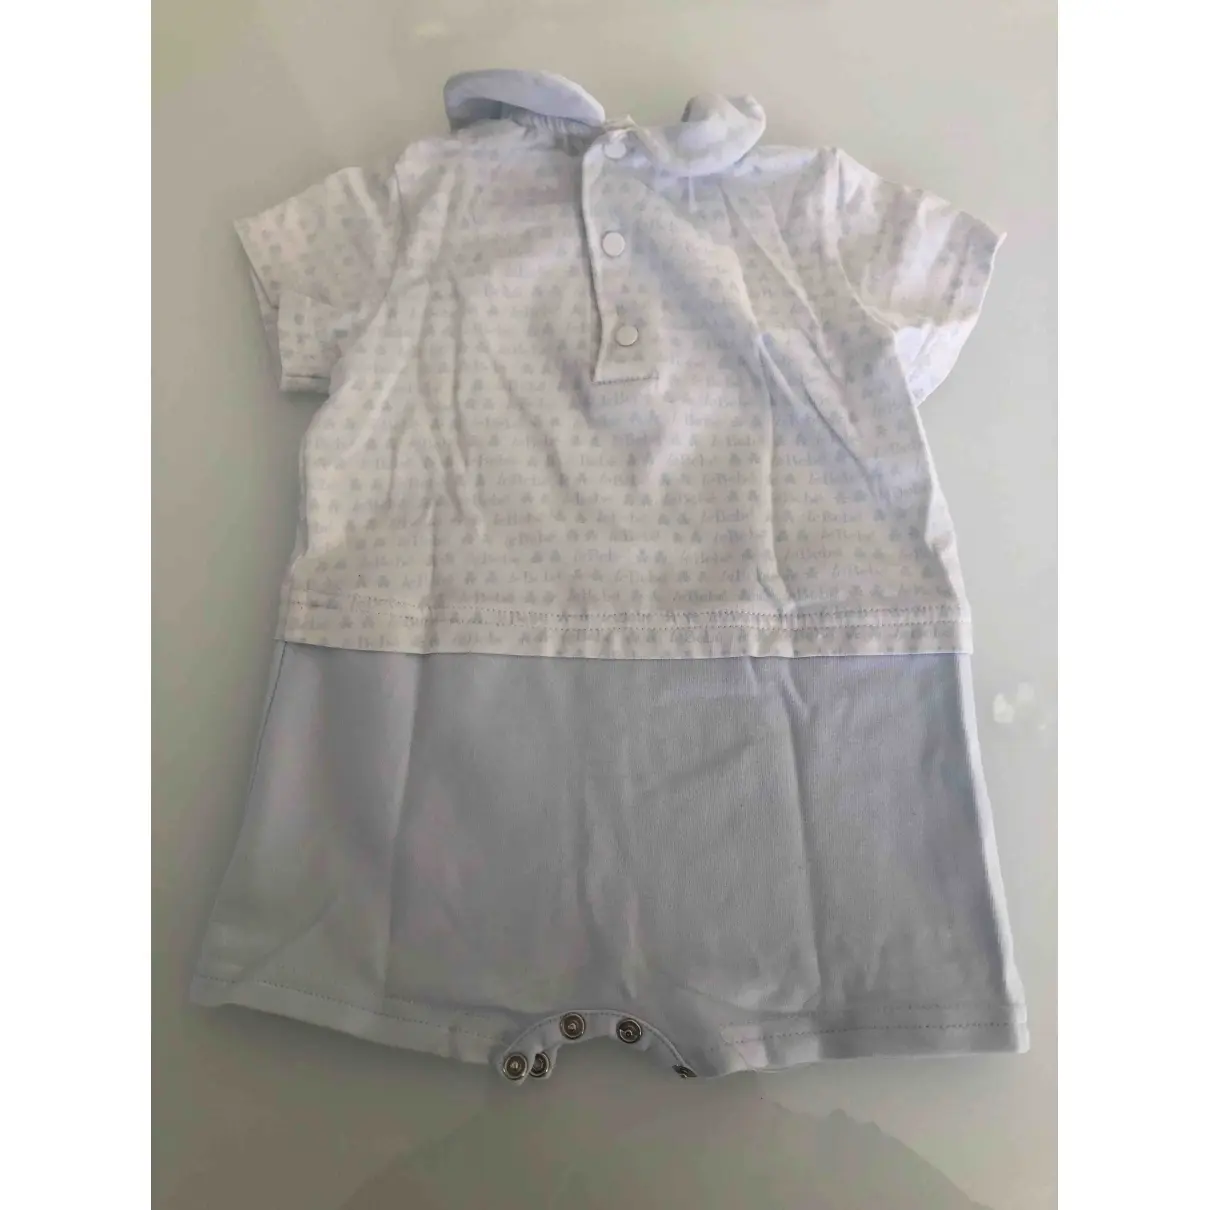 Le Bebe Outfit for sale